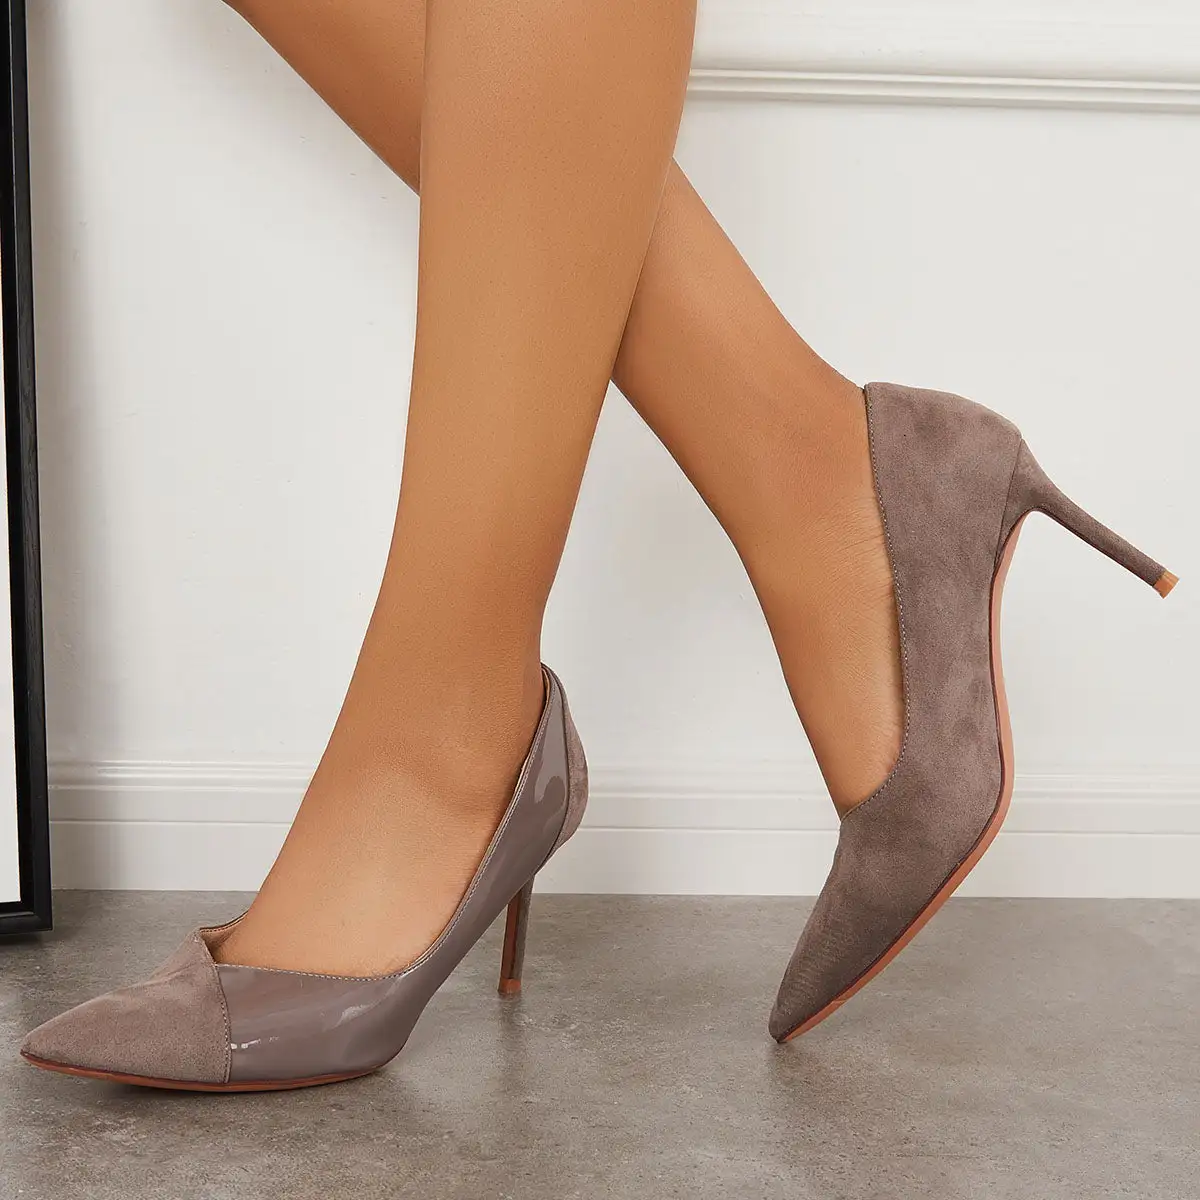 Pointy Toe Two Tone Stiletto High Heels Slip on Pumps